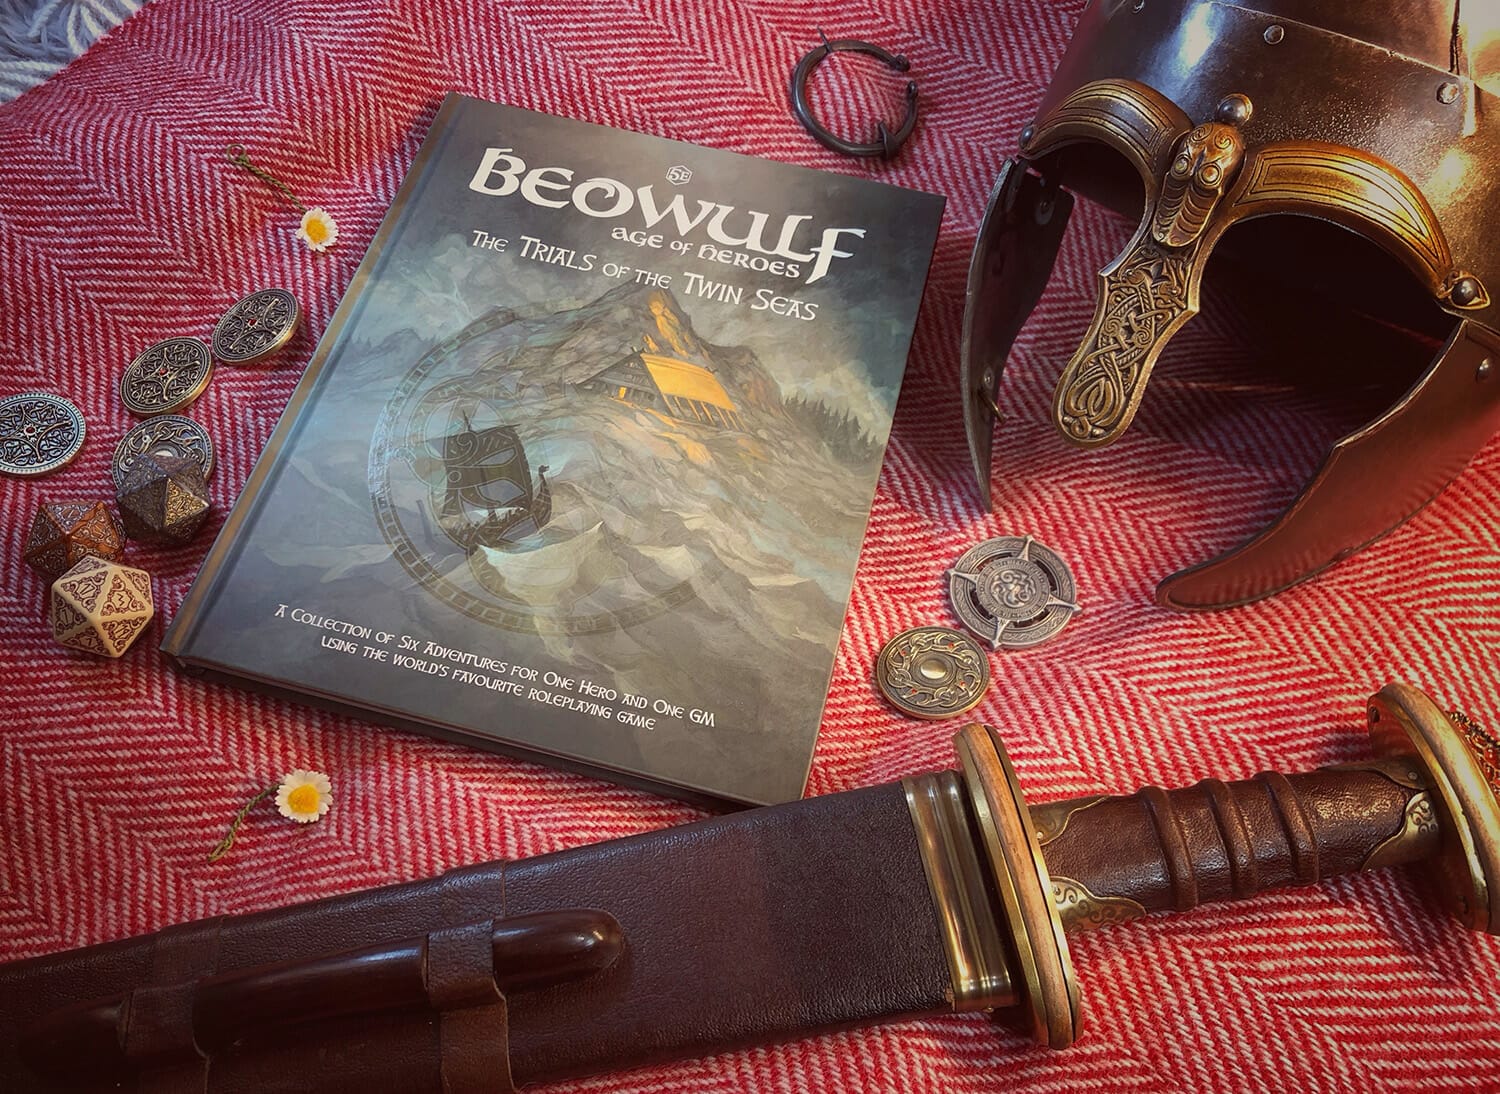 Beowulf book lays on red rug with coins, a helmet and short sword nearby